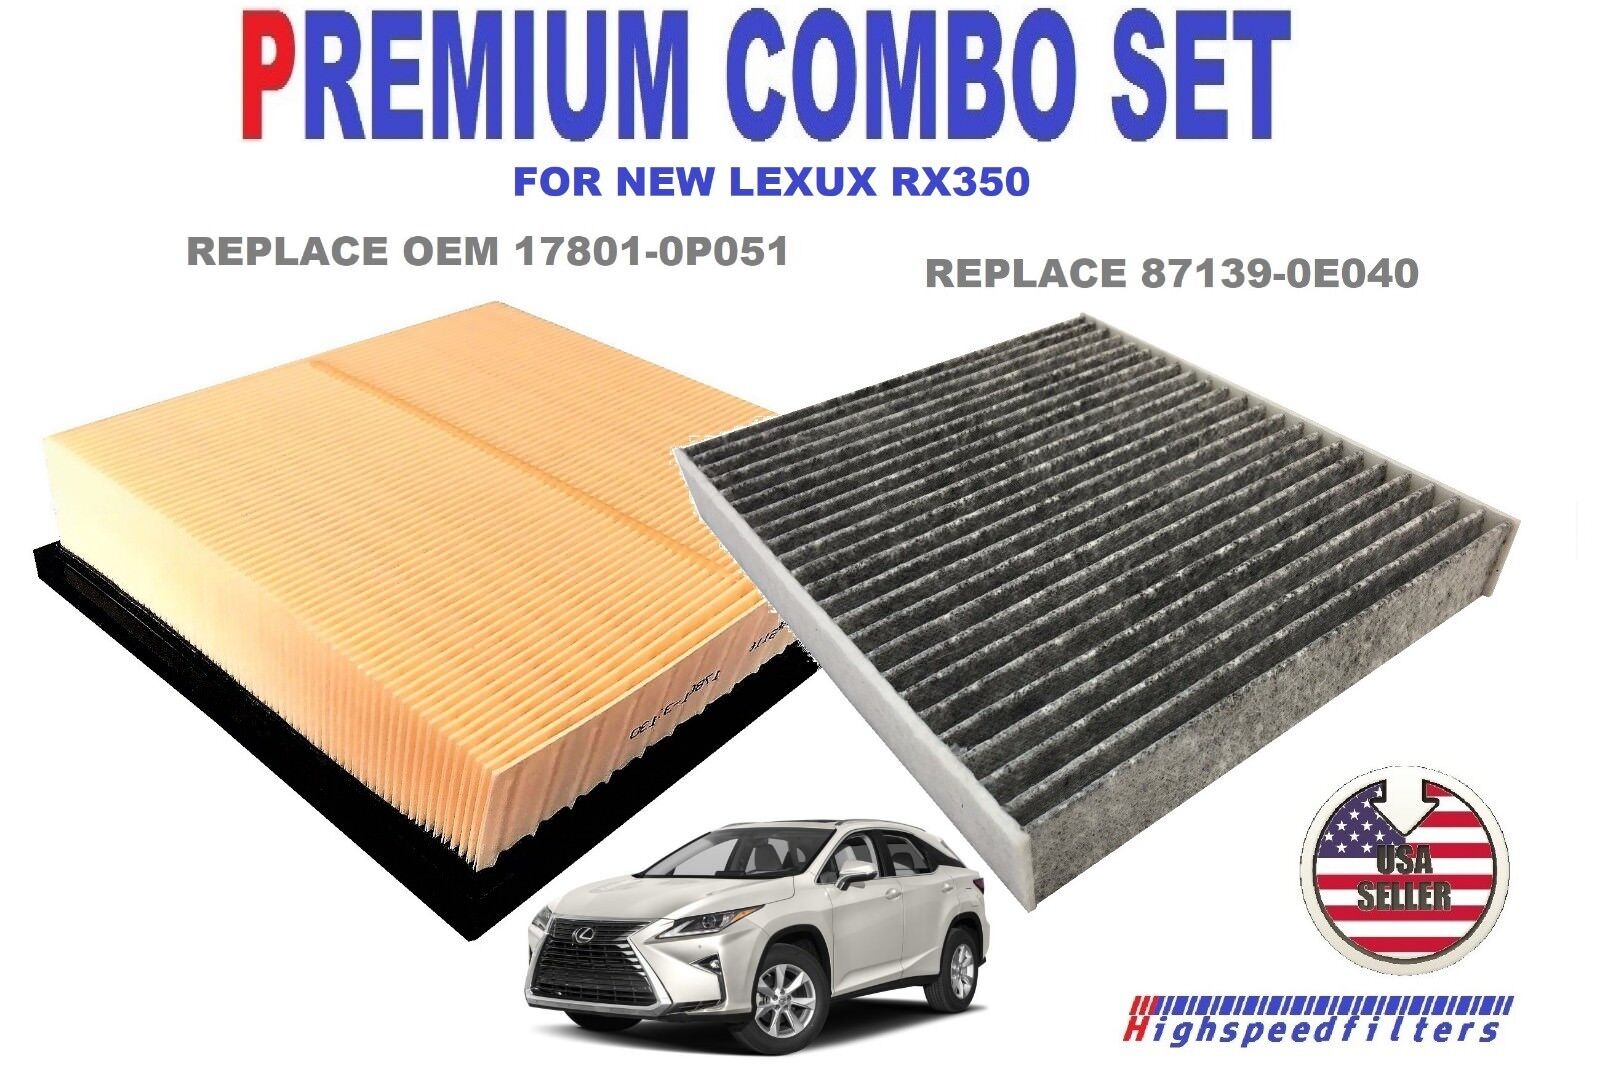 PREMIUM COMBO AIR FILTER & CHARCOAL CABIN FILTER FOR 2016 - 2022 LEXUS RX350